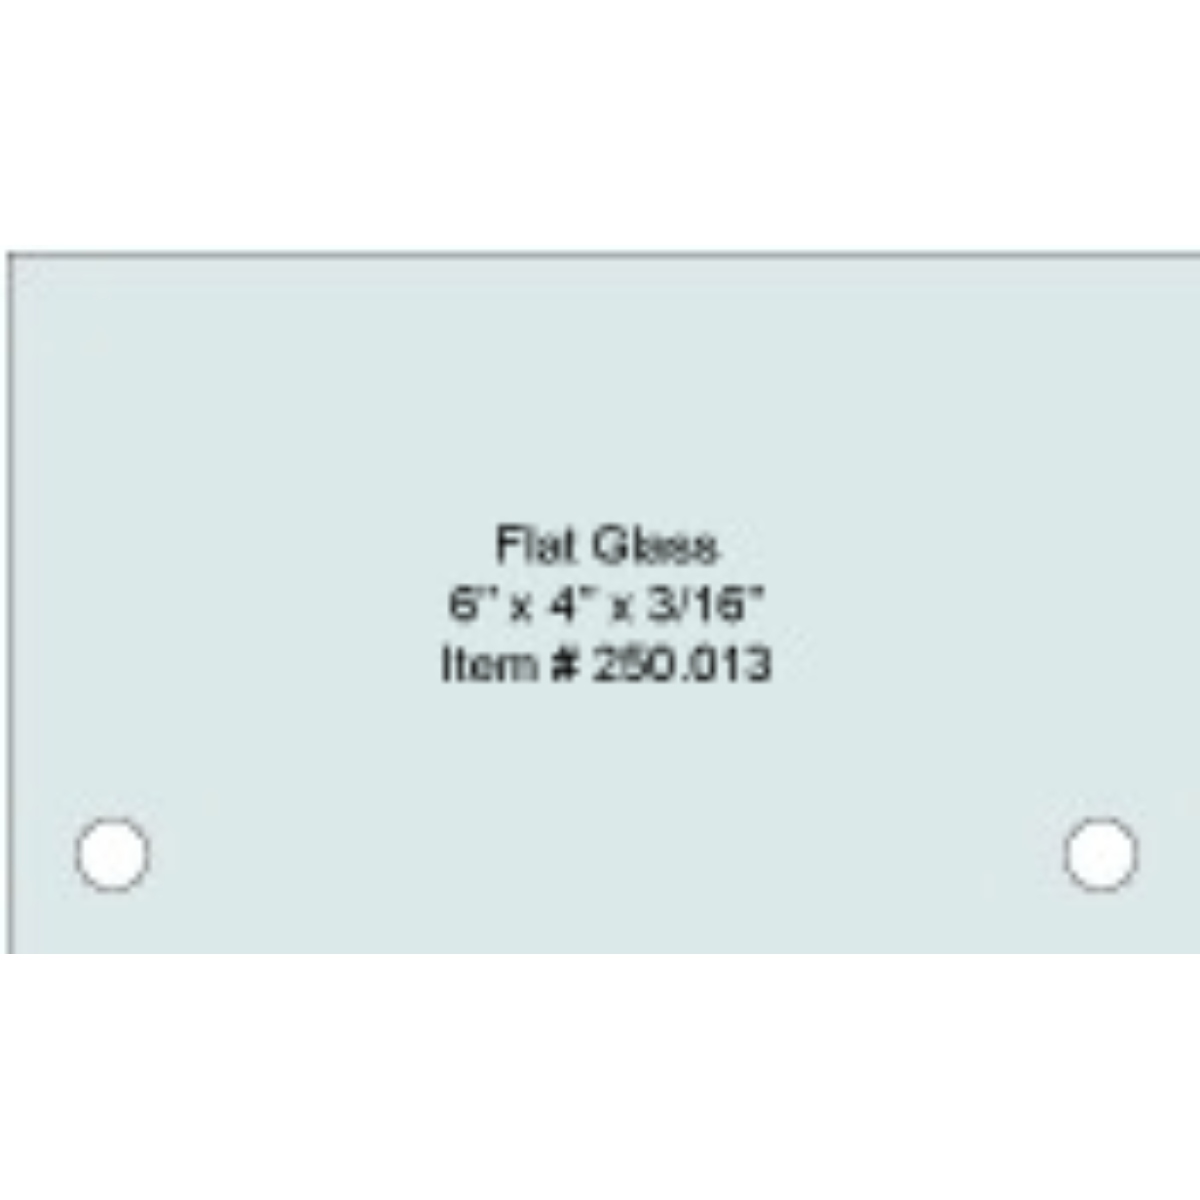 Flat Tempered Glass 6'' x 4'' x 5/32'', 2 pre-drilled 3/8 holes